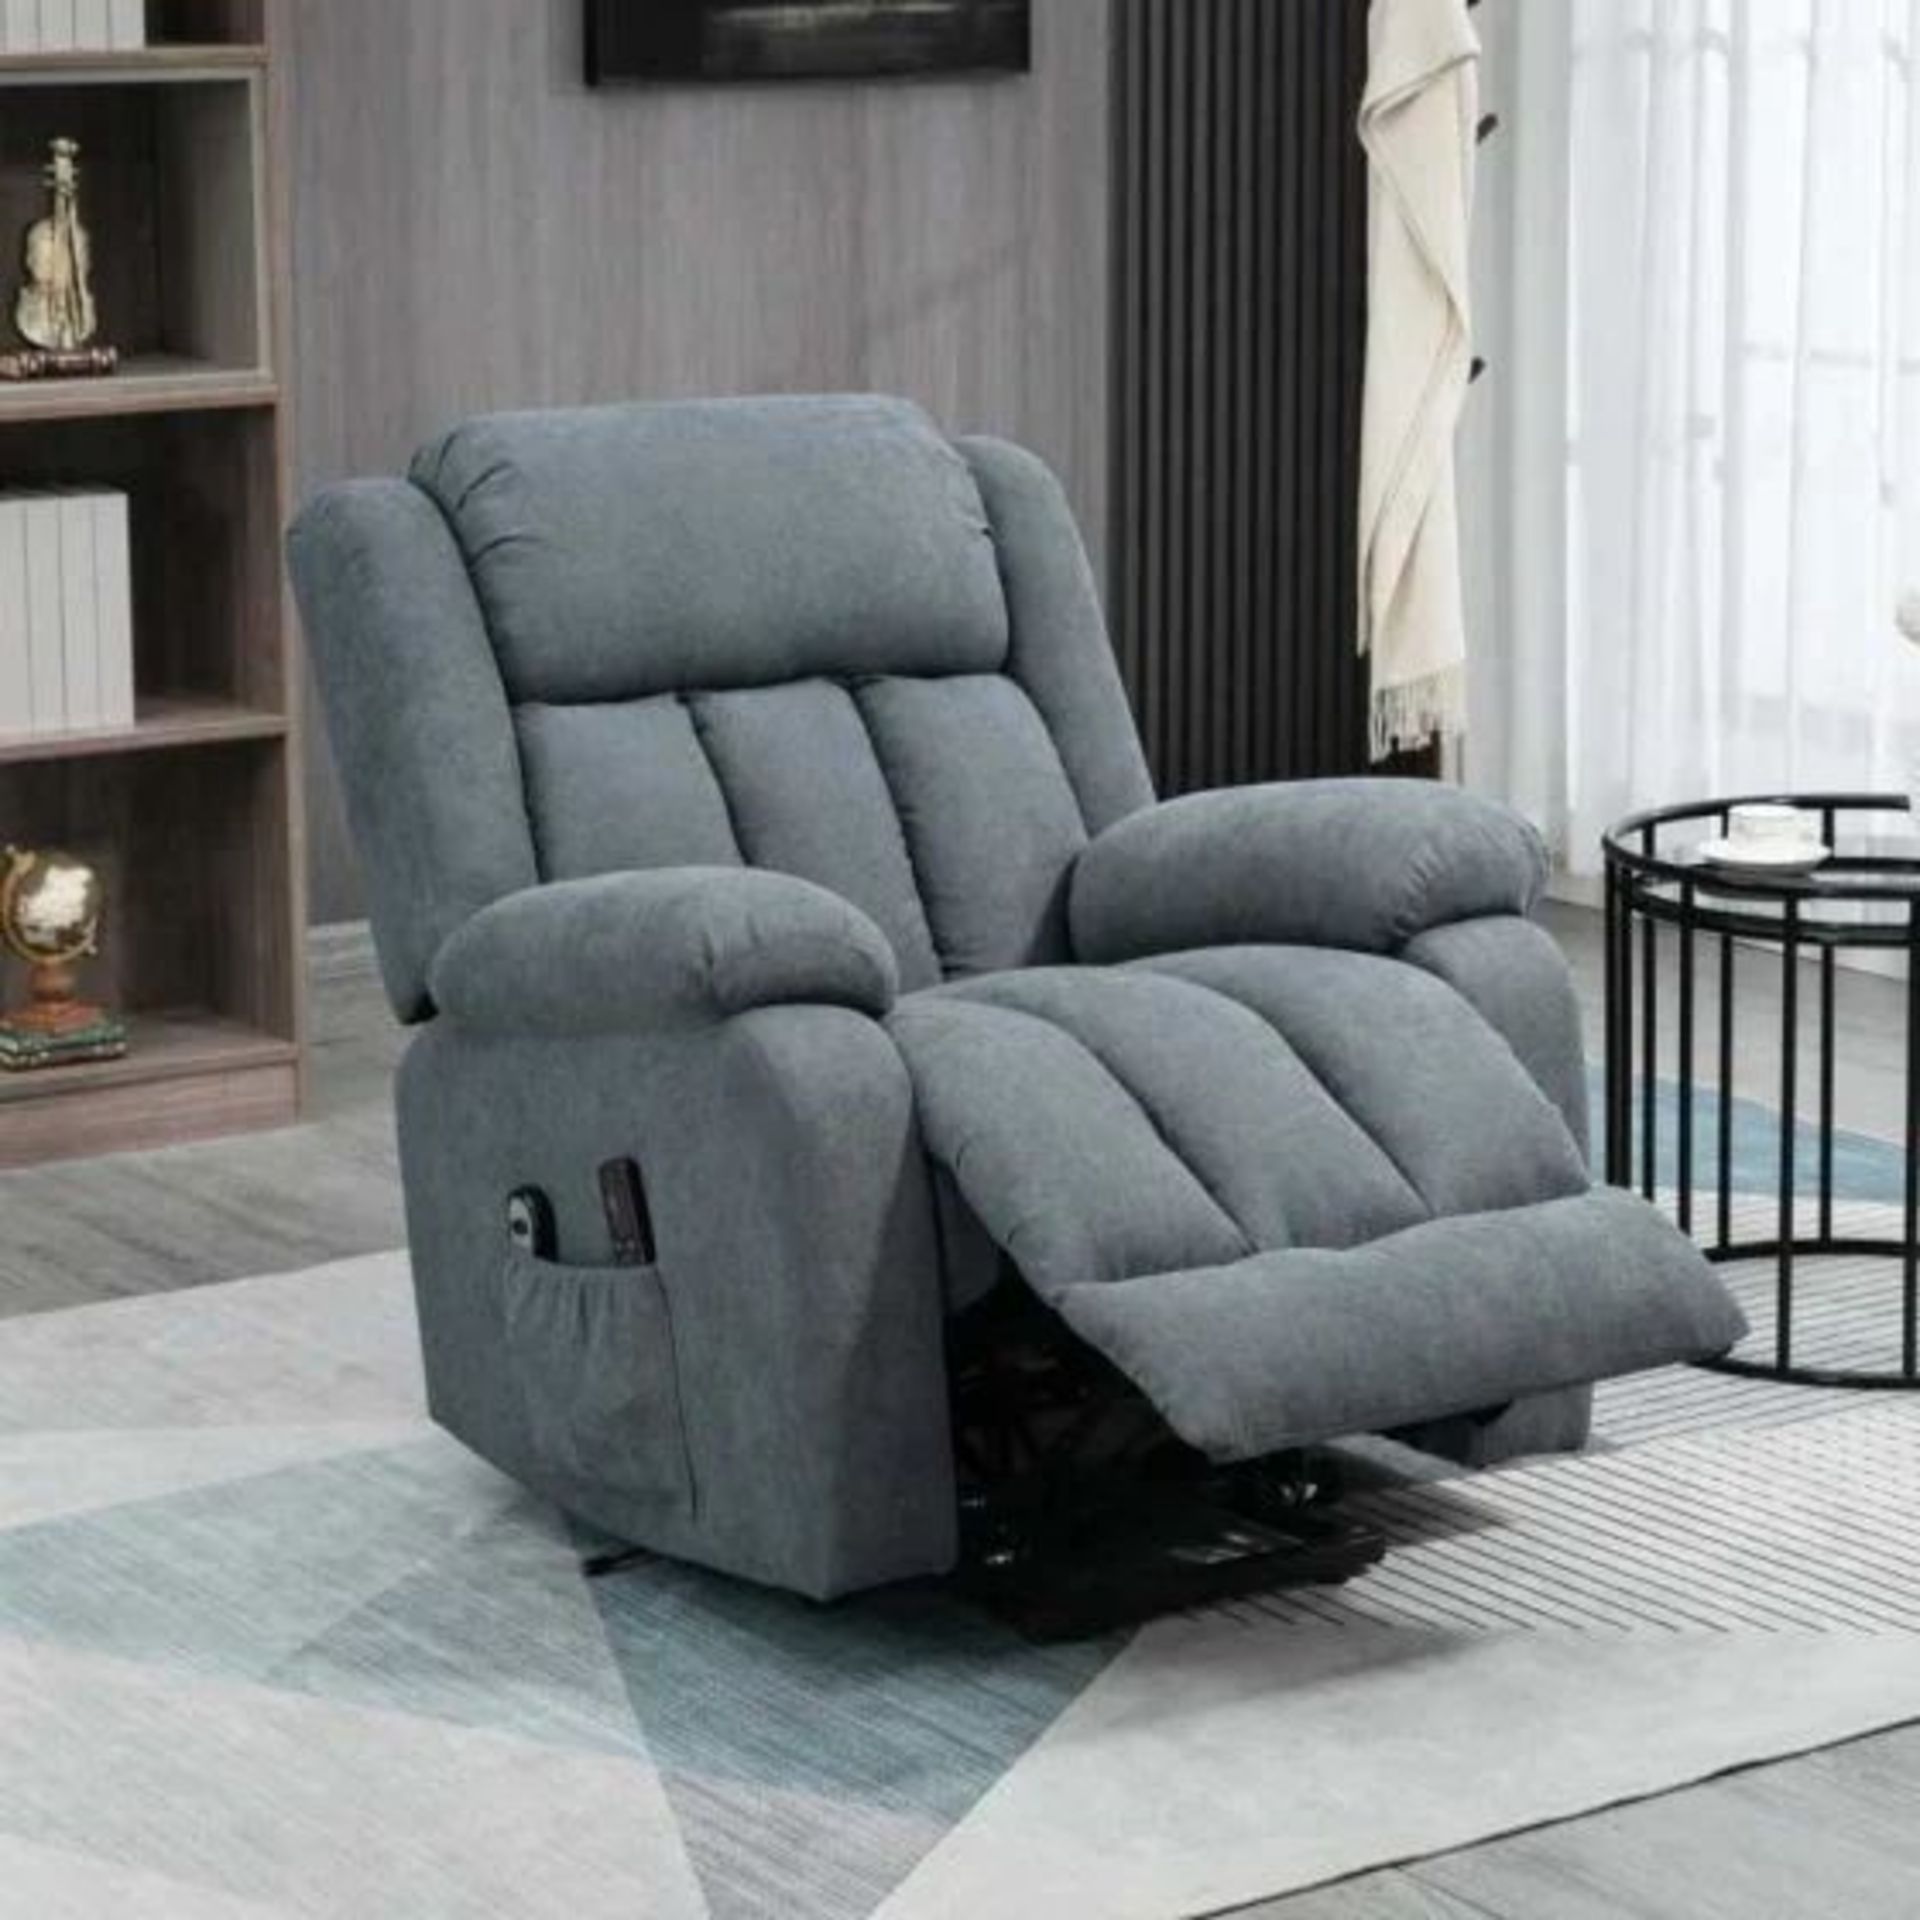 HOMCOM Oversized Electric & Rise Recliner Chair with Vibration Massage - Dark Grey. - Rack. RRP £